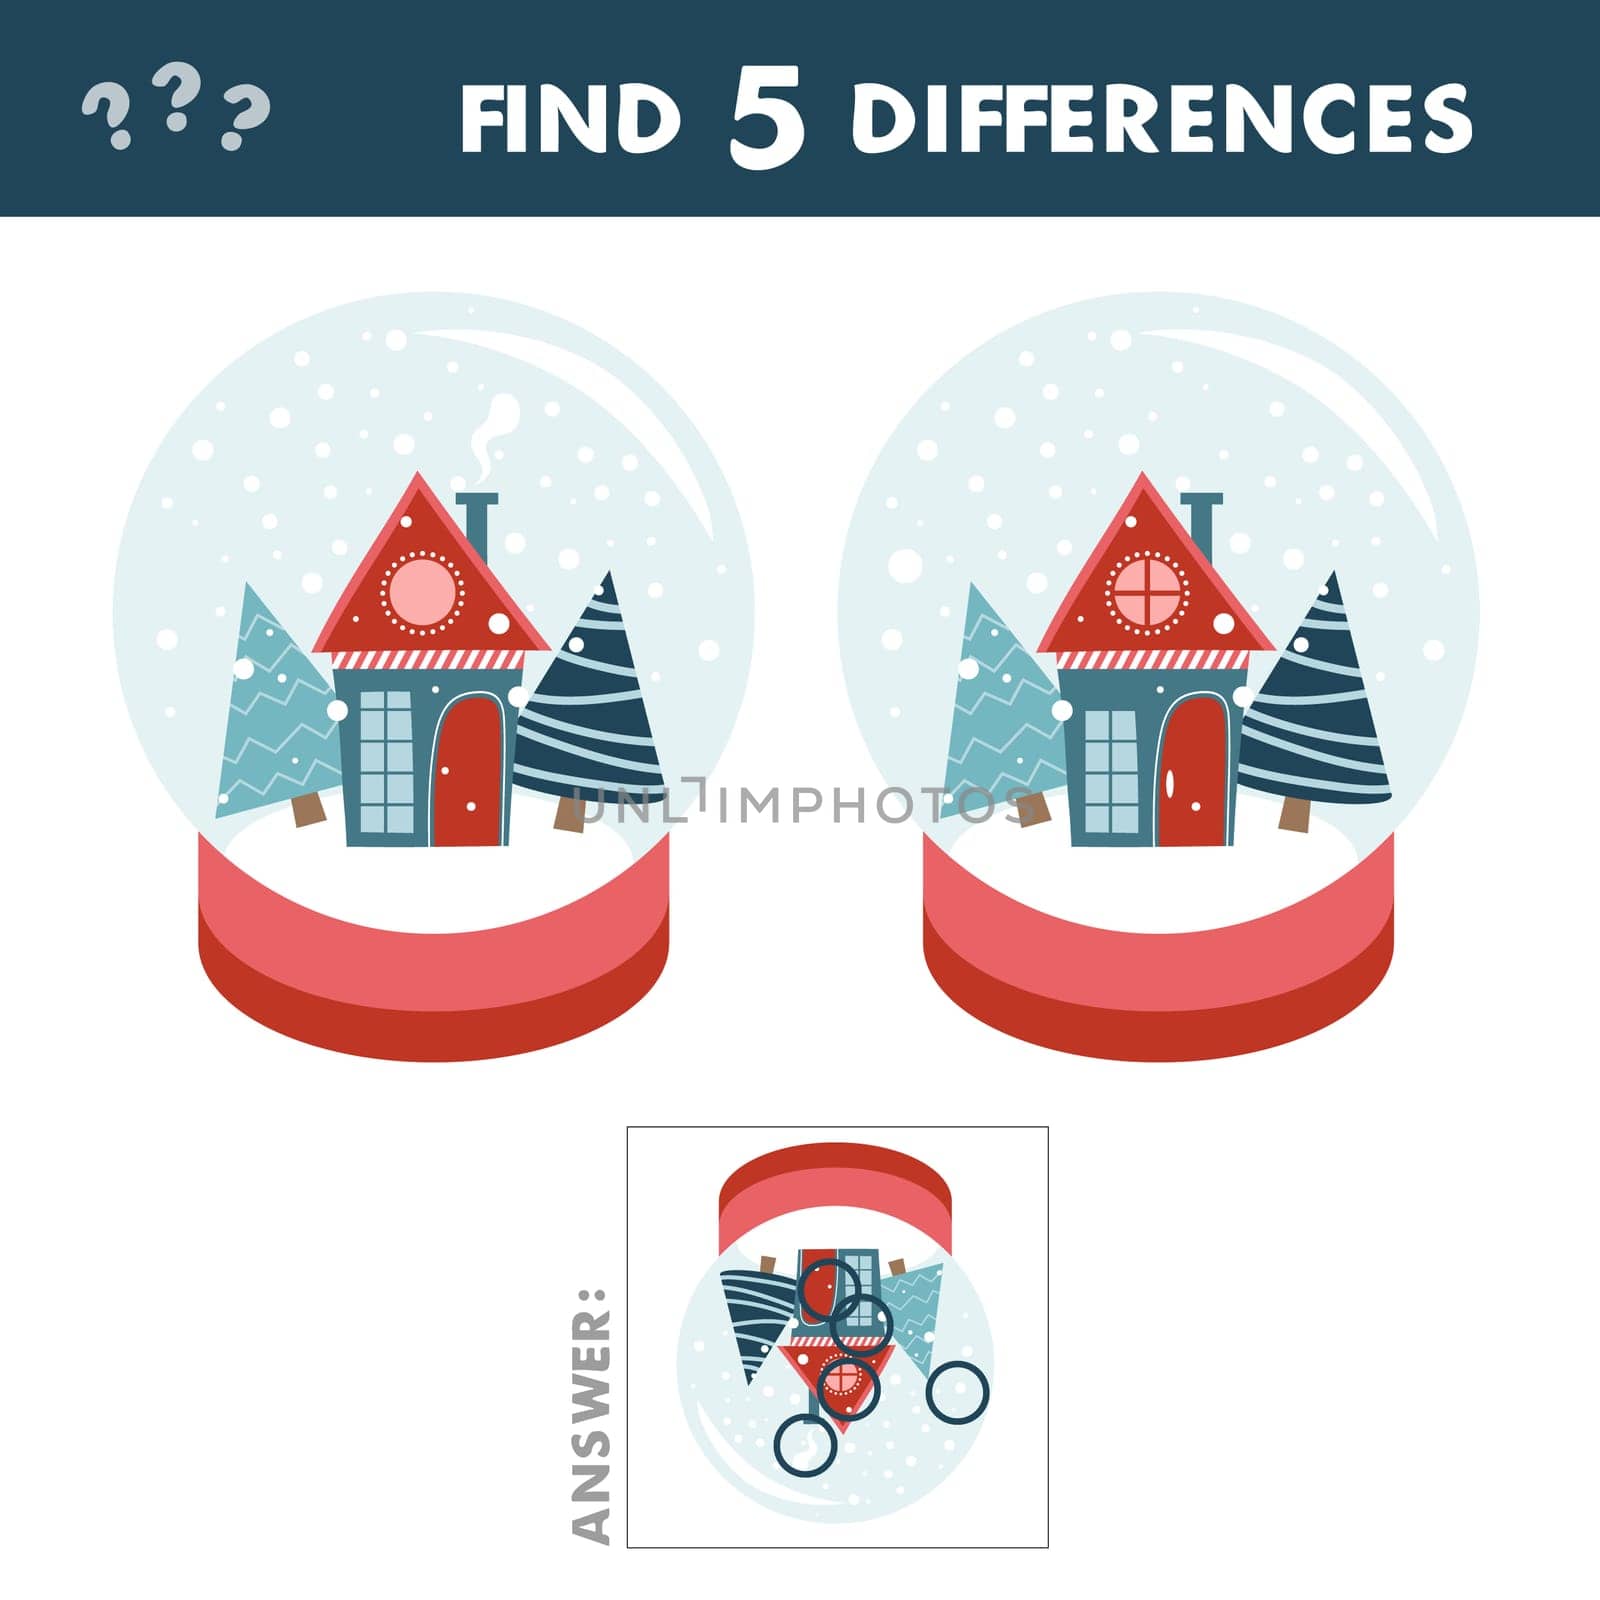 Kids game find differences. Merry christmas snow globe with a small house and fir-tree under the snow. Educational leisure activity with answer